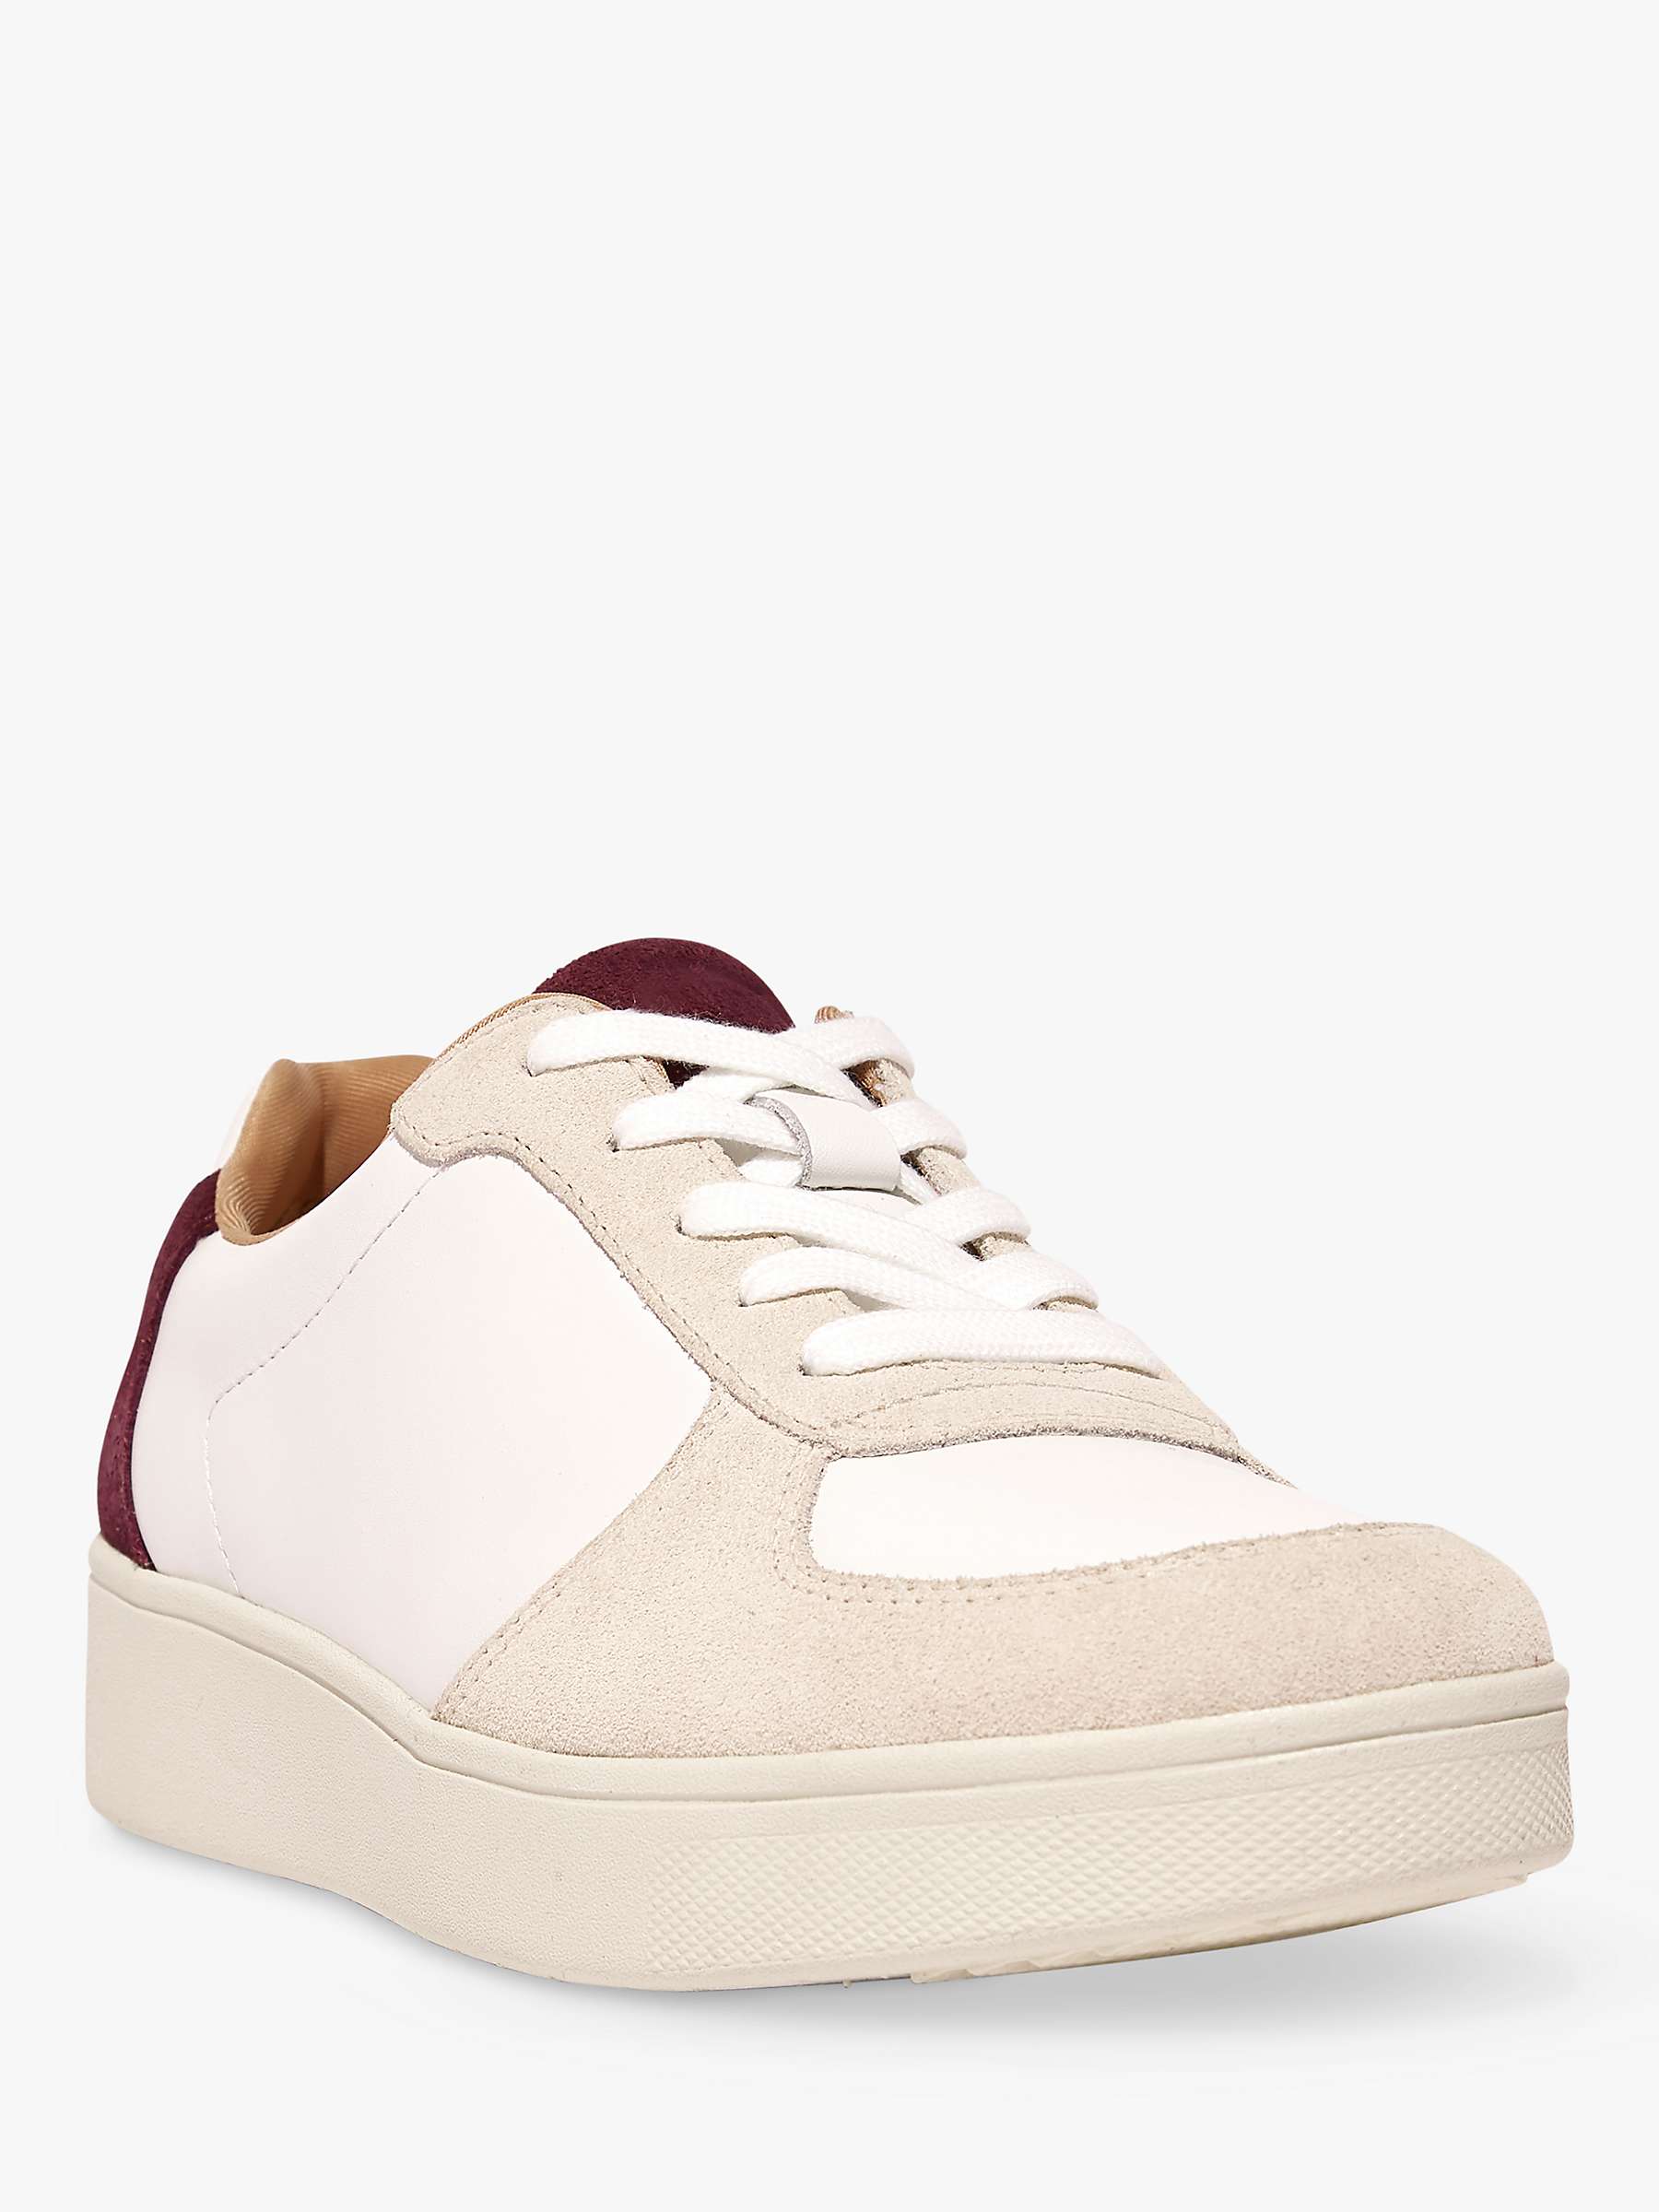 Buy FitFlop Rally Leather Trainers Online at johnlewis.com